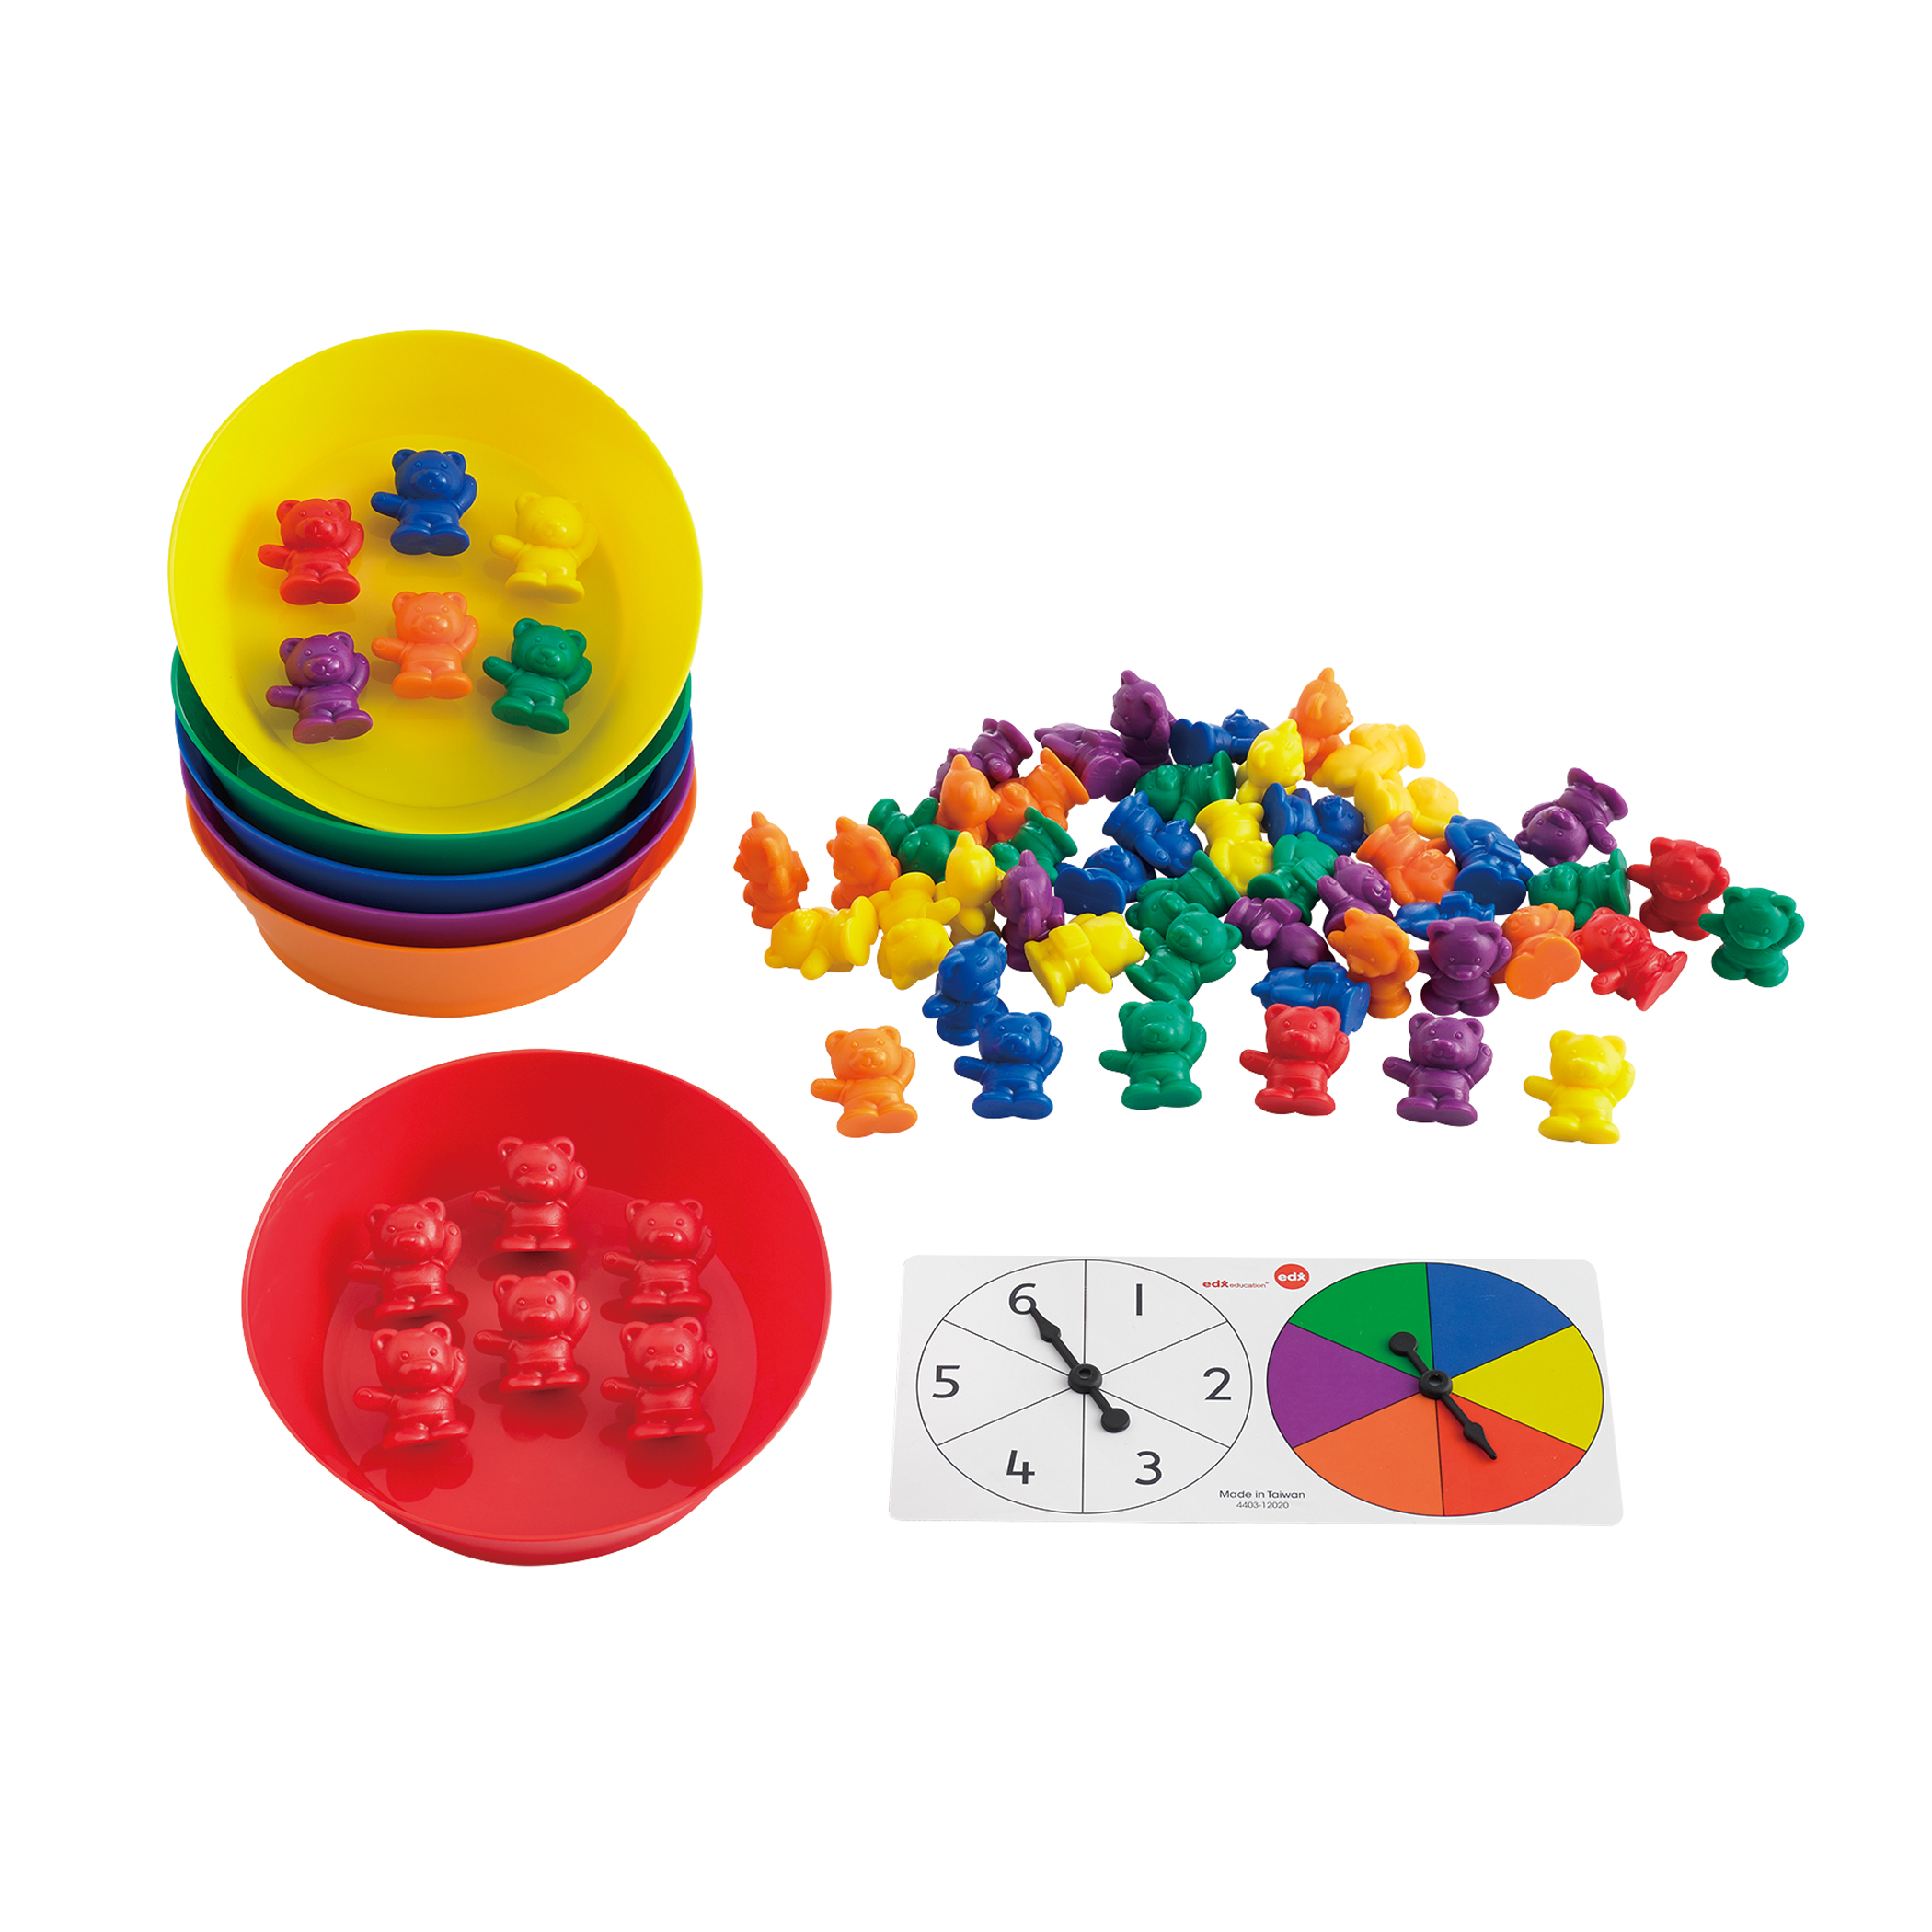 edxeducation Counting Bears with Matching Bowls - 68pc Set - 60 Bear Counters, 6 Bowls & 2 Game Spinners image number null